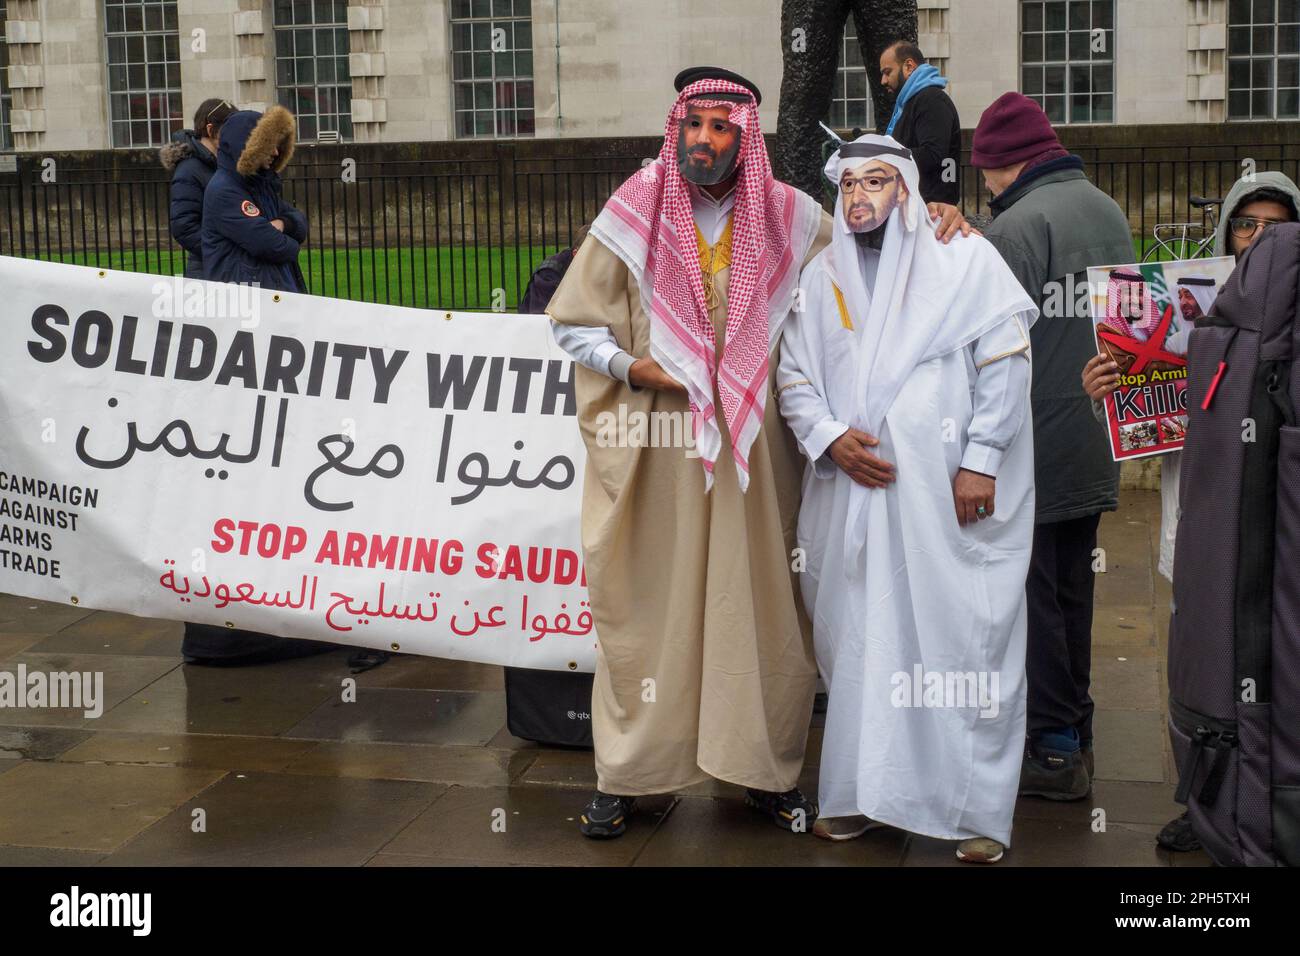 London, UK. 26 Mar 2023. 8 years after the start of the brutal assault on Yemen by Saudi-led forces people stand in a vigil at Downing St organised by CAAT for the thousands who have died, and call for the UK to stop supplying arms. The UN estimates that more than 377,000 had died by the end of 2021 and the UK has supplied arms worth over £23 billion. Two men wear robes and masks of Saudi rulers. Peter Marshall/Alamy Live News Stock Photo